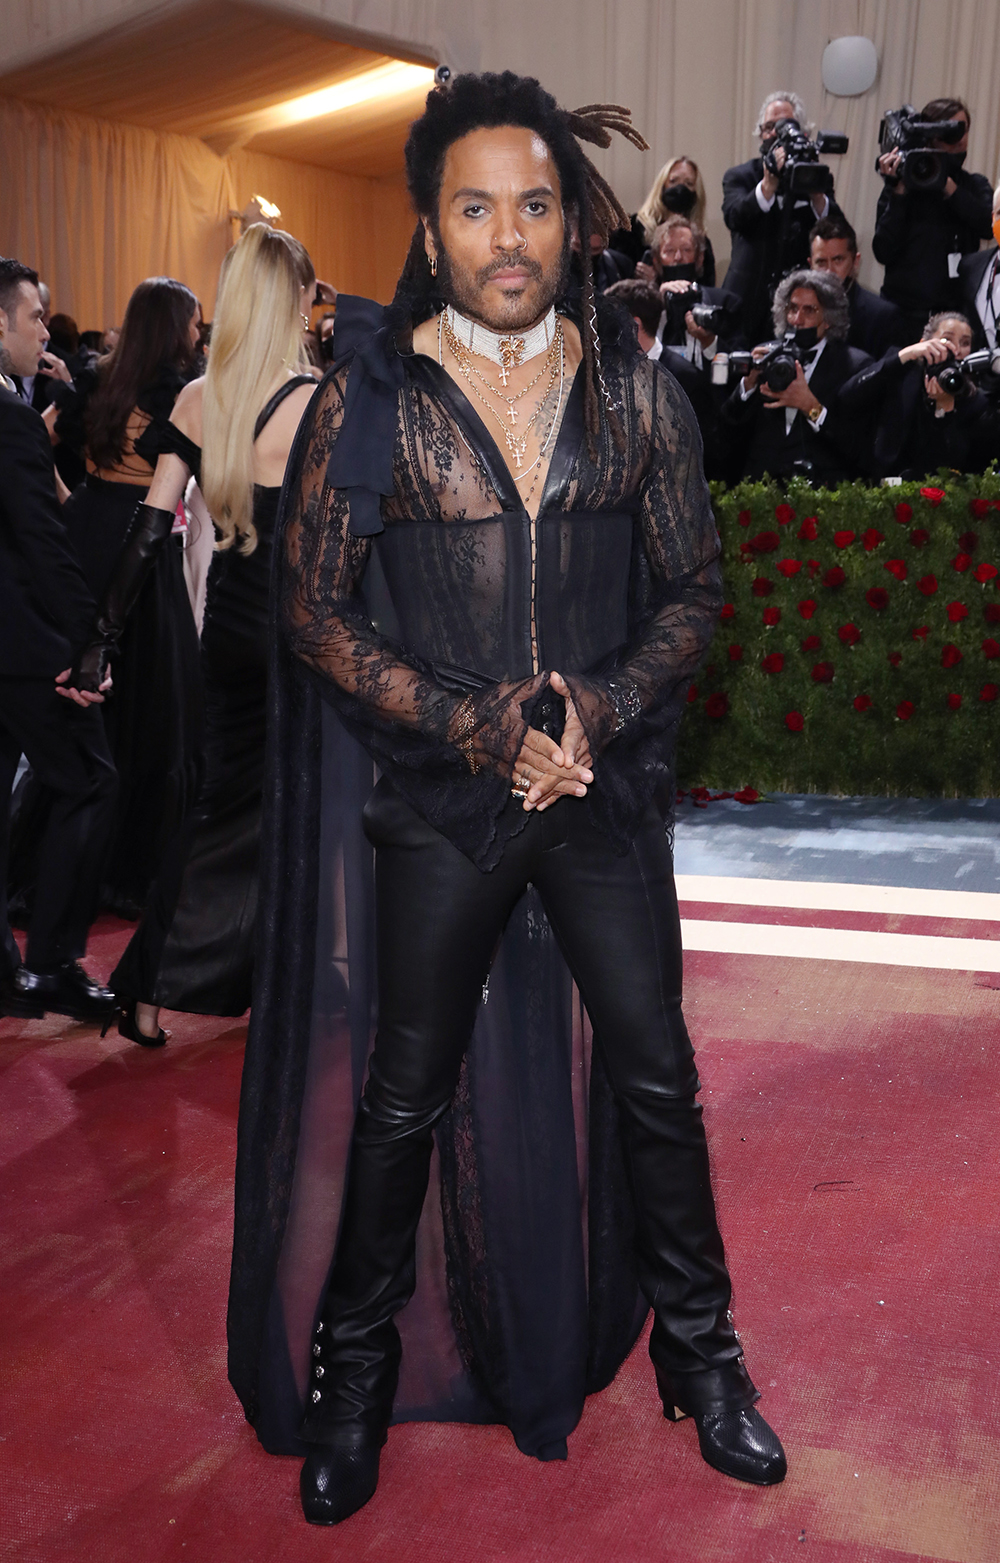 <p>Another red carpet win for Lenny! The rocker <a href="https://hollywoodlife.com/2022/05/02/lenny-kravitz-met-gala-2022/">was pure drama</a> in a lace top with corset-inspired details, leather pants, and a sheer cape during the <a href="https://hollywoodlife.com/pics/met-gala-red-carpet-2022-photos/">2022 Met Gala</a>. The event celebrated the opening of ‘In America: An Anthology of Fashion’ and happened on May 2, 2022.</p>